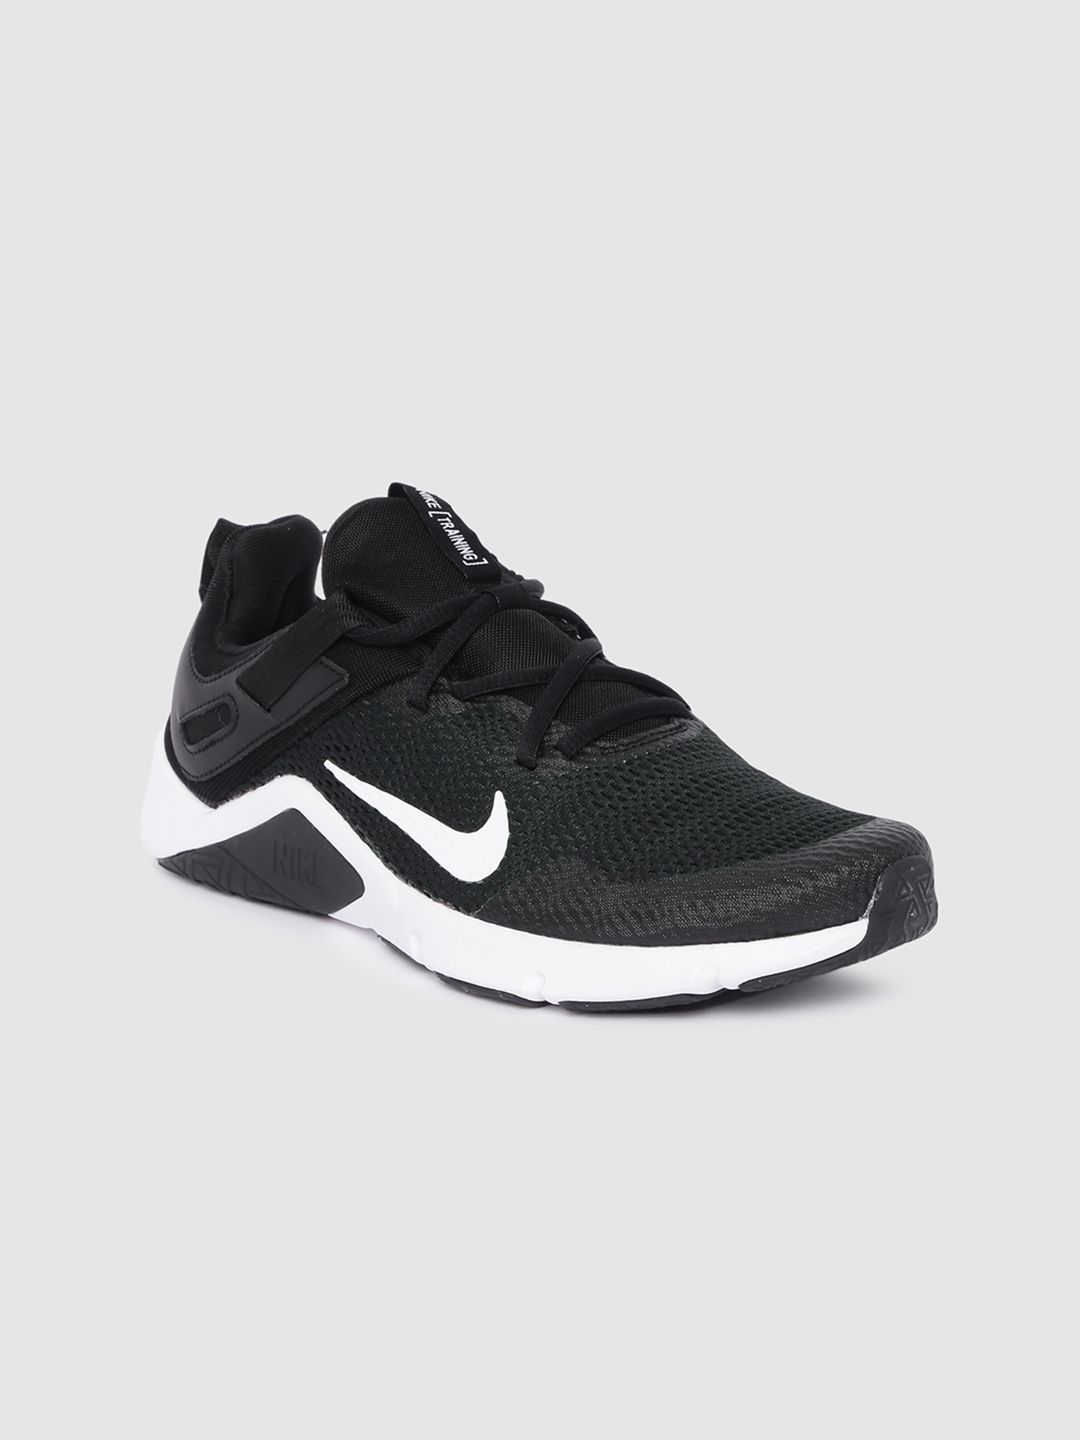 Nike Women Black Textile LEGEND Training Shoes Price in India